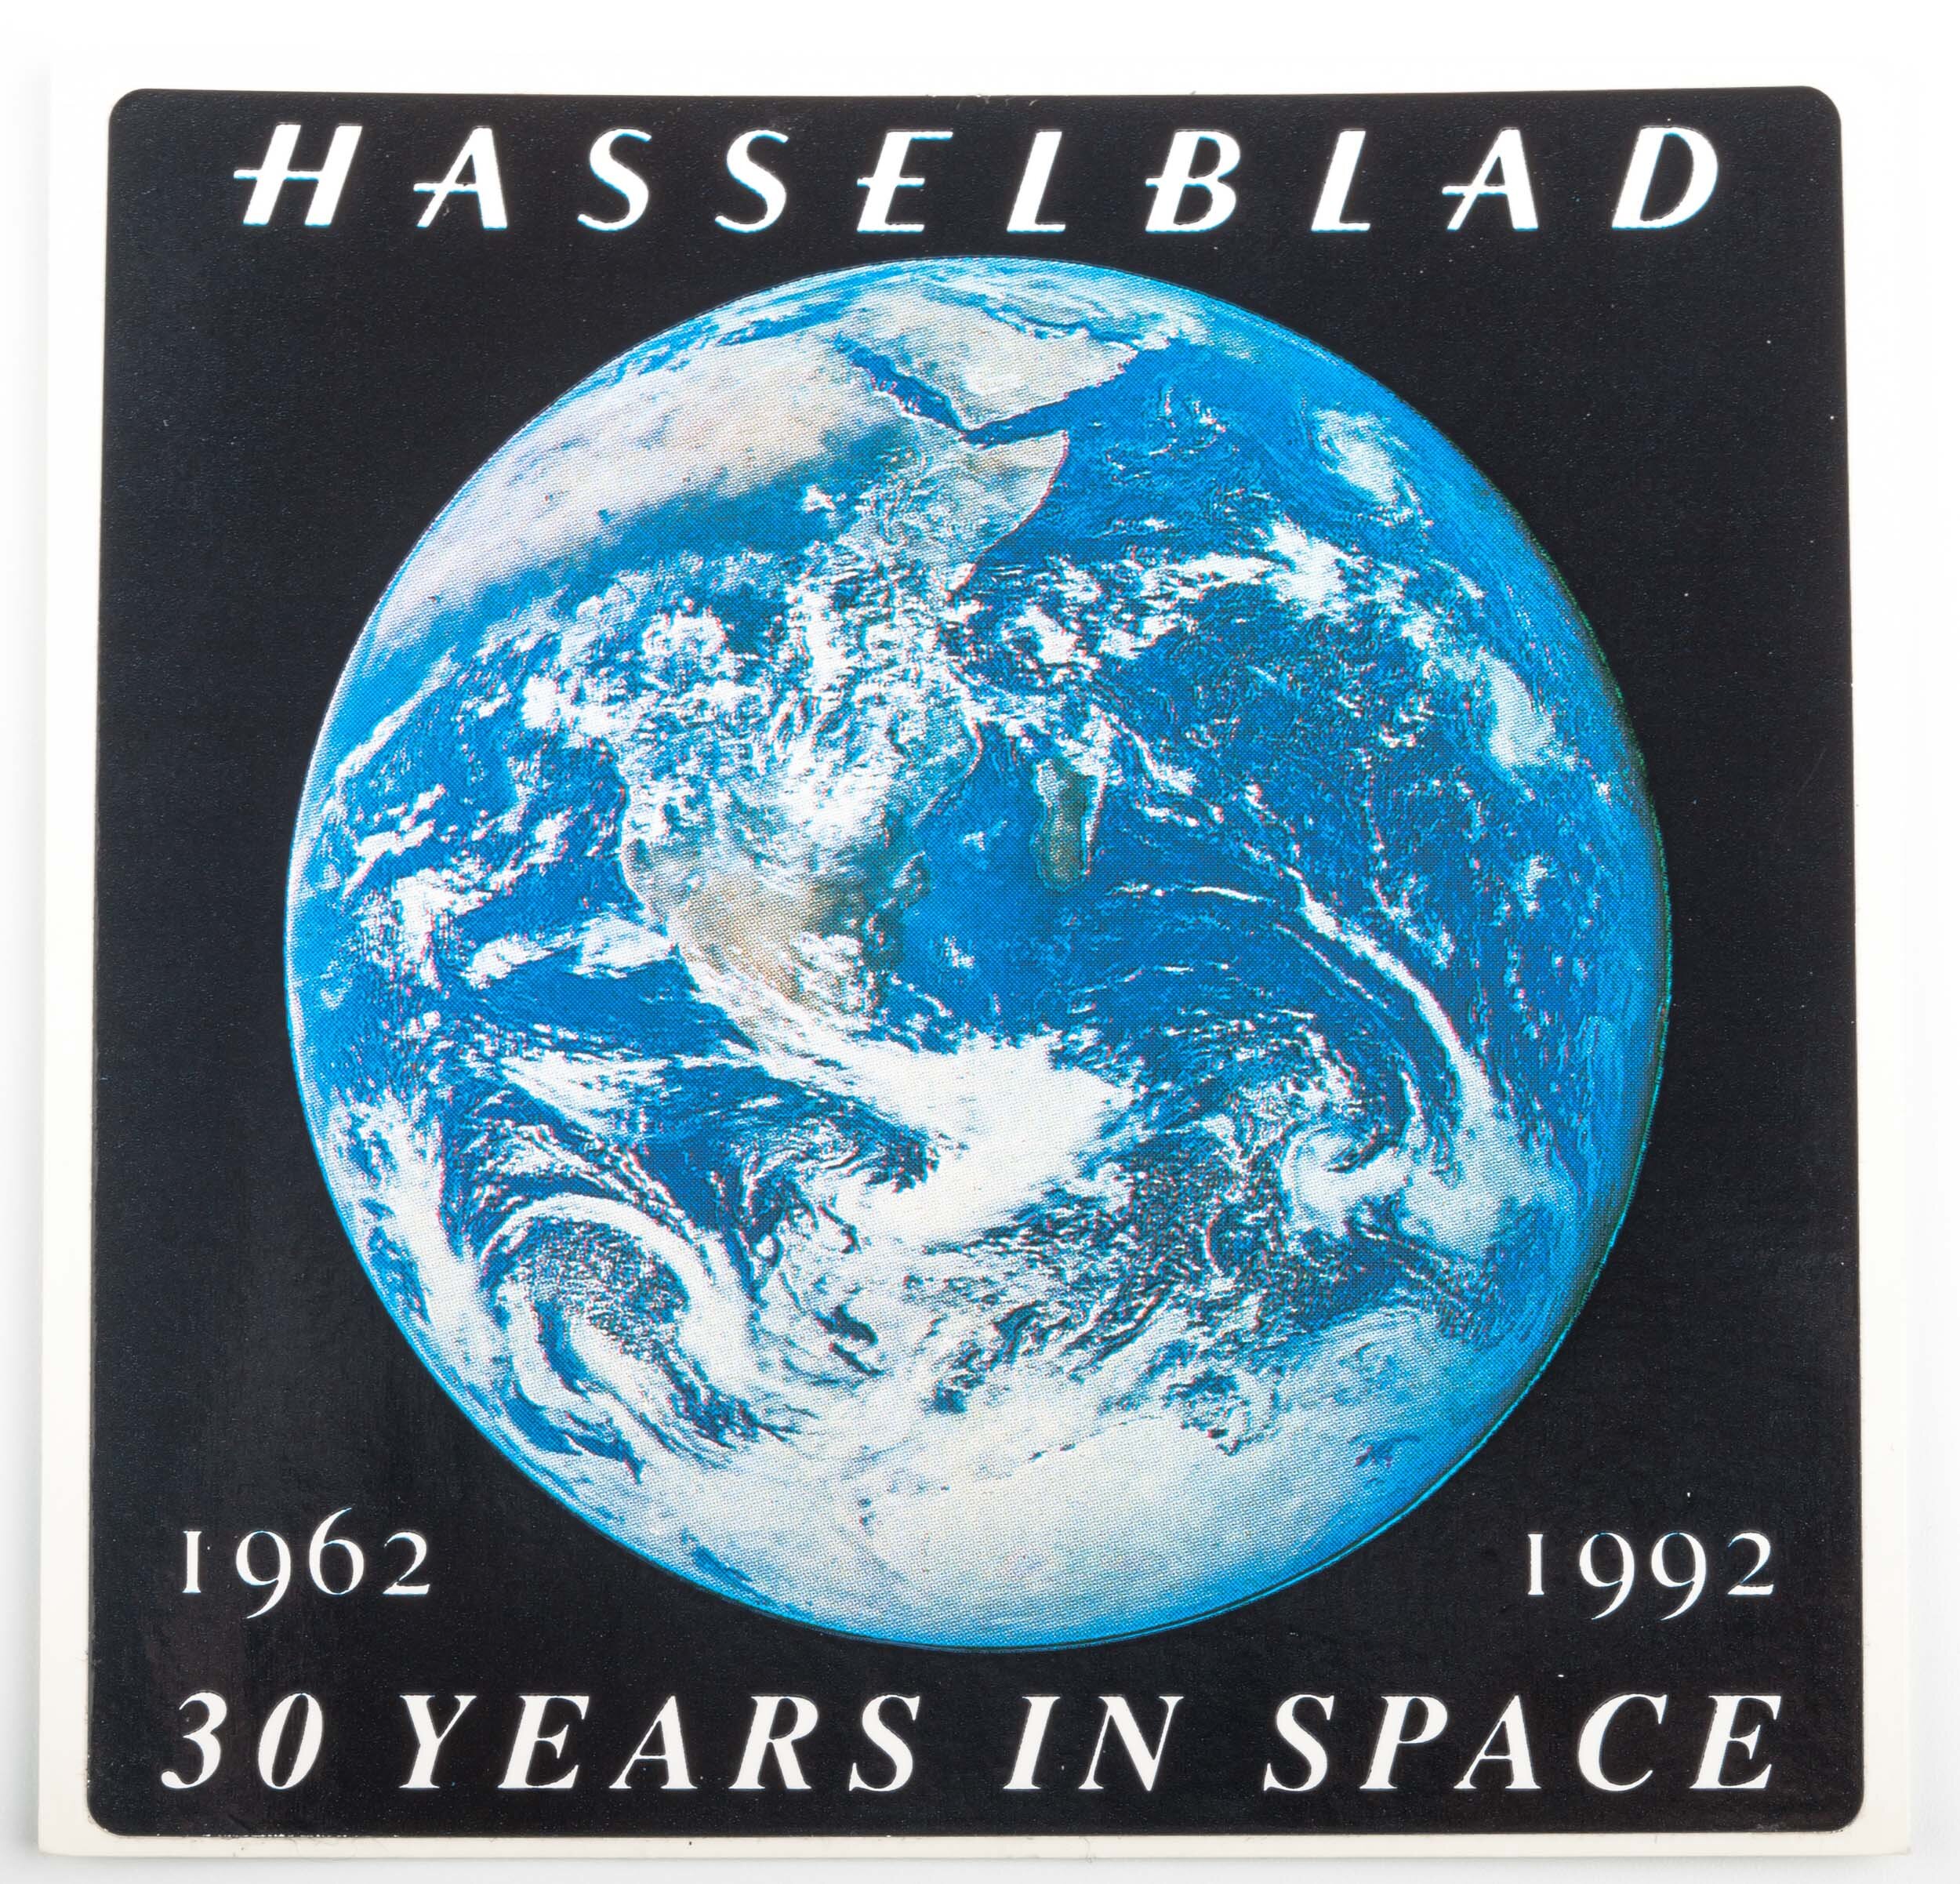 Hasselblad Sticker "30 Years in space 1962-1992"